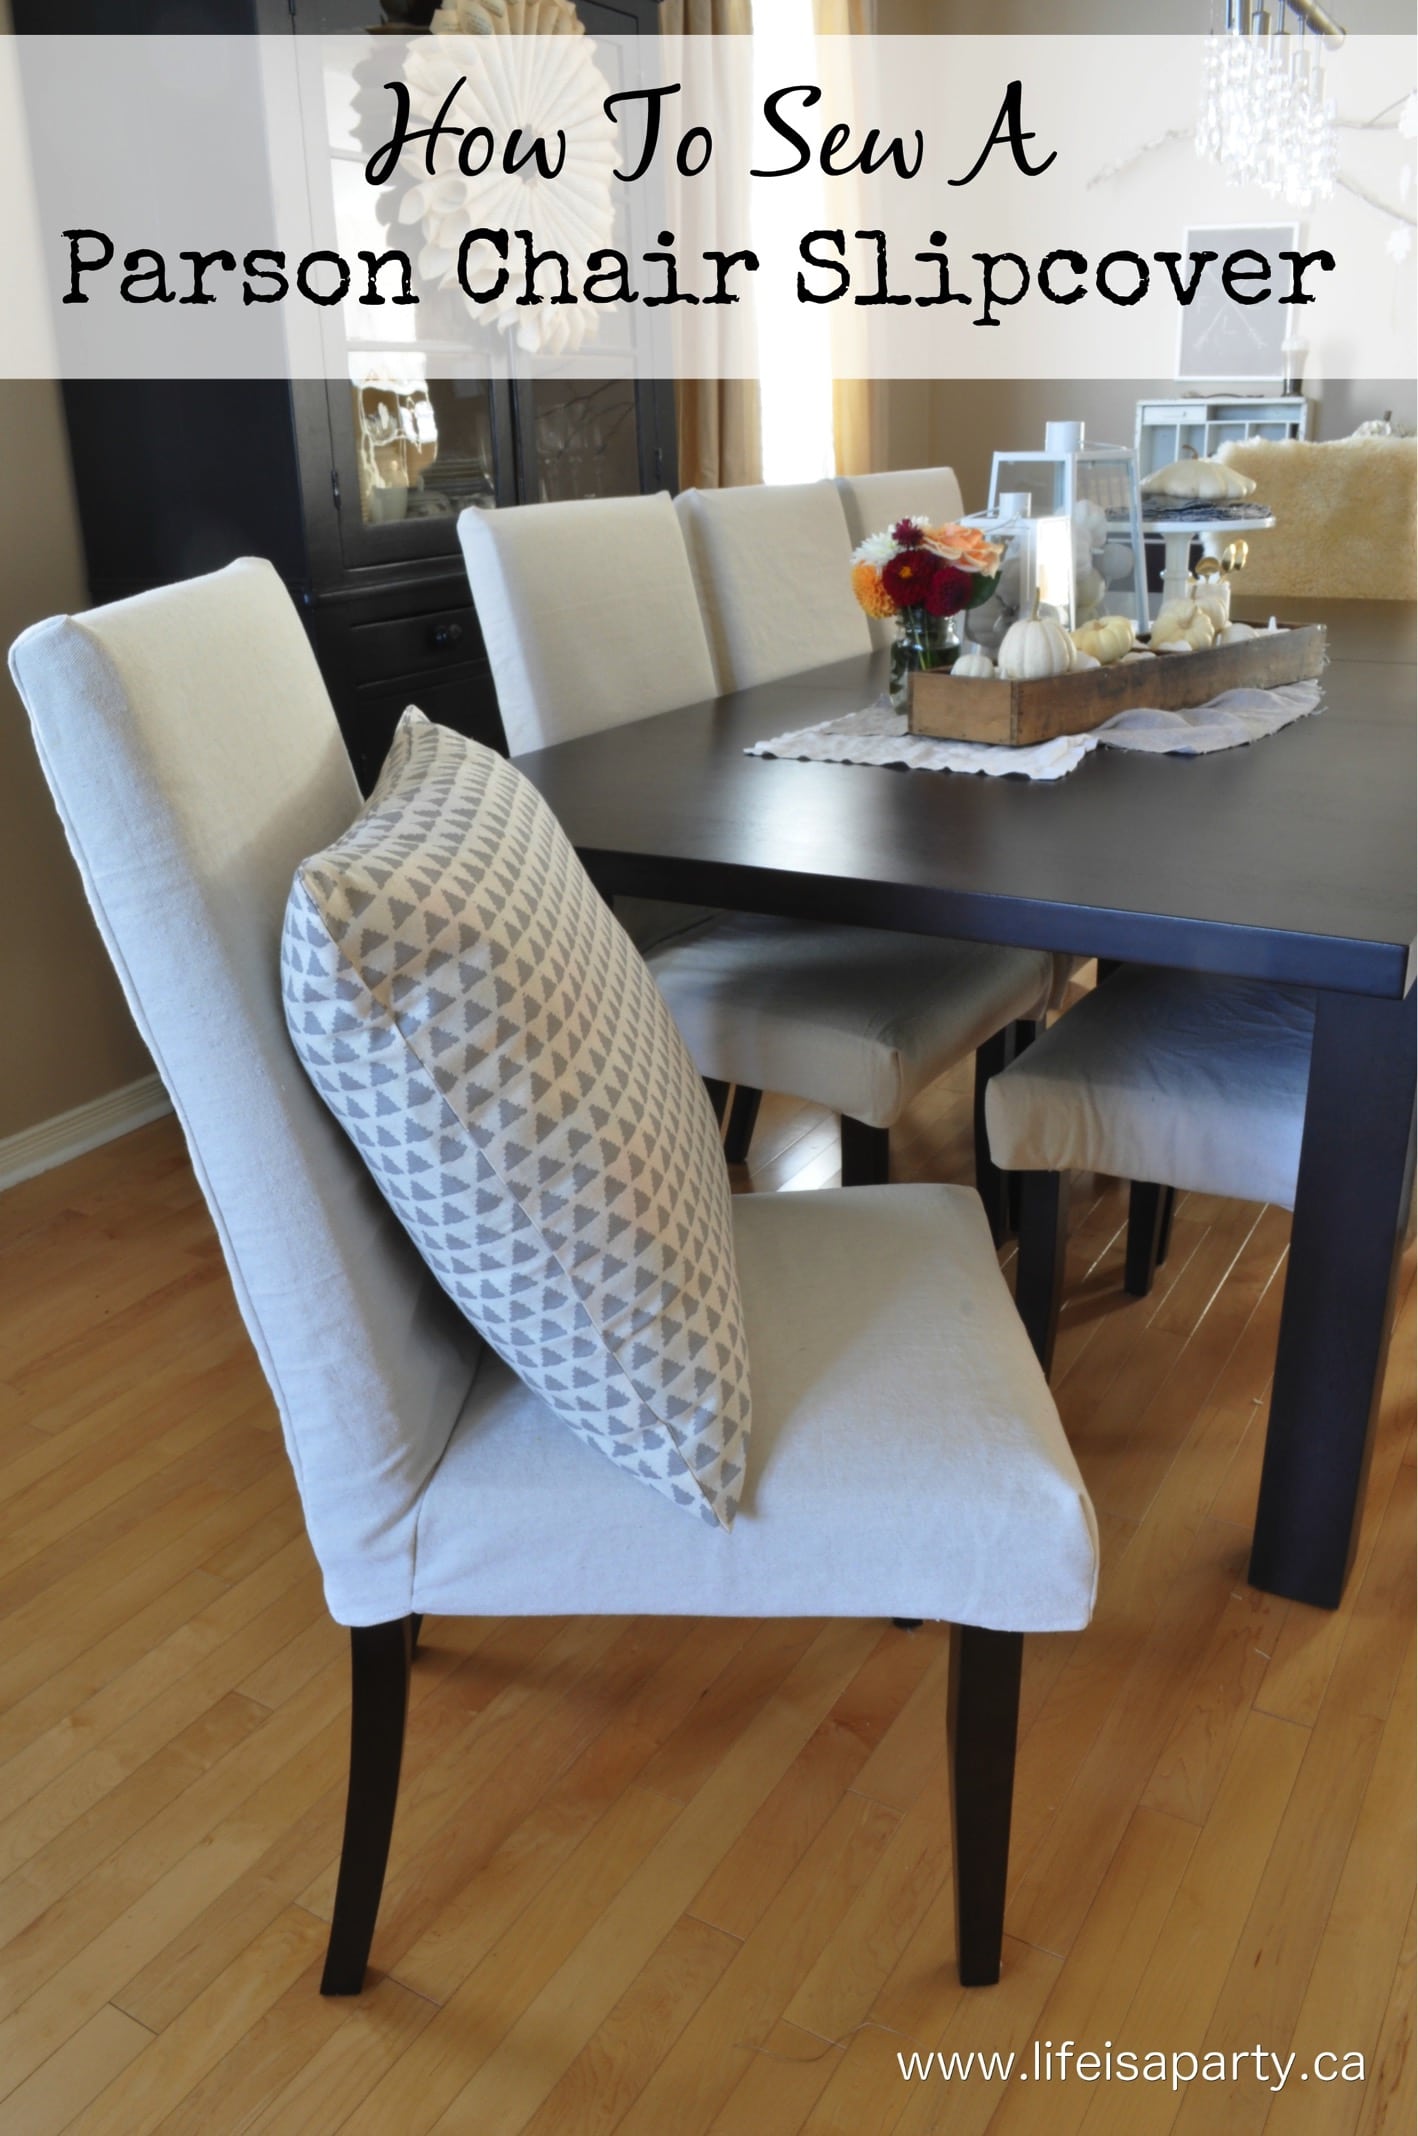 How To Sew Parson Chair Slipcovers: Inexpensive chair makeover with drop cloth slipcovers you can sew yourself without a pattern.